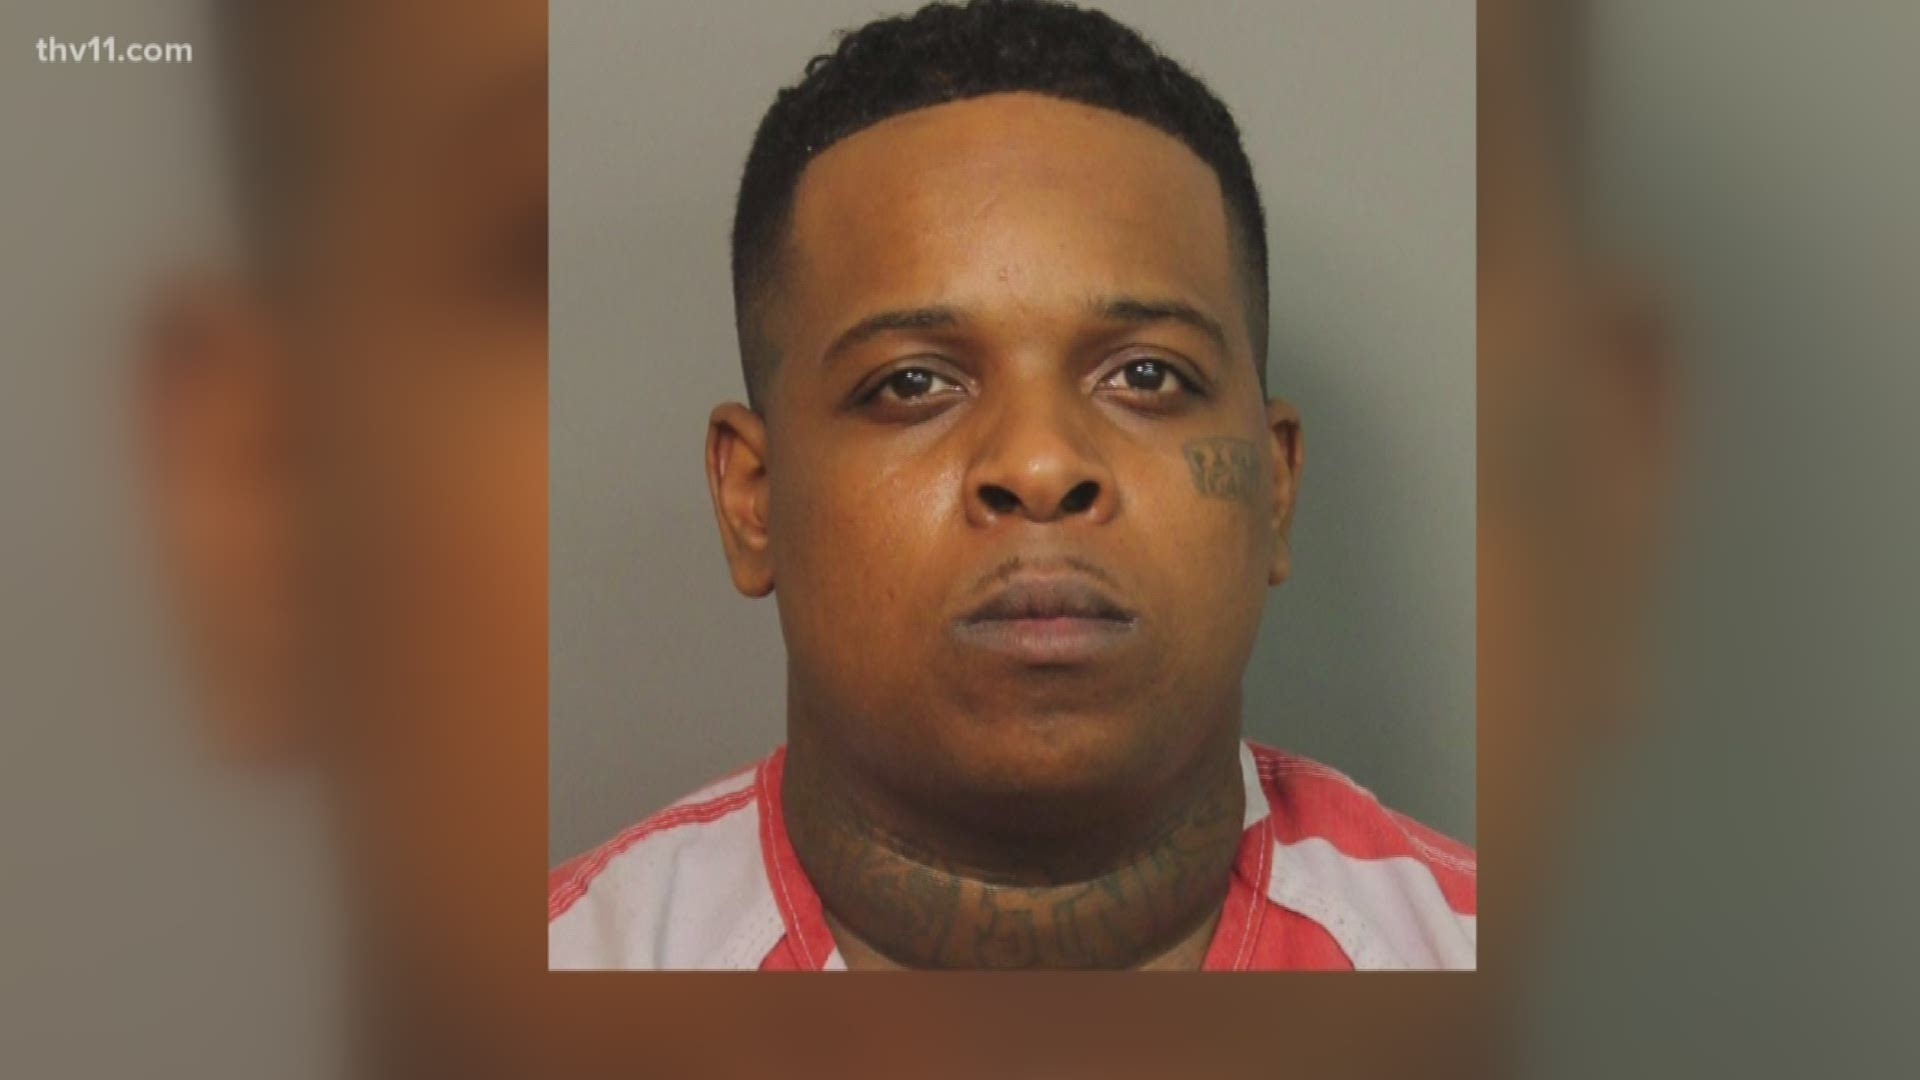 A Tennessee rapper has been sentenced in Arkansas to five years in prison on a federal weapons charge that came after he was arrested with a gun a week before a shooting at an unrelated event at a Little Rock nightclub where he was performing.